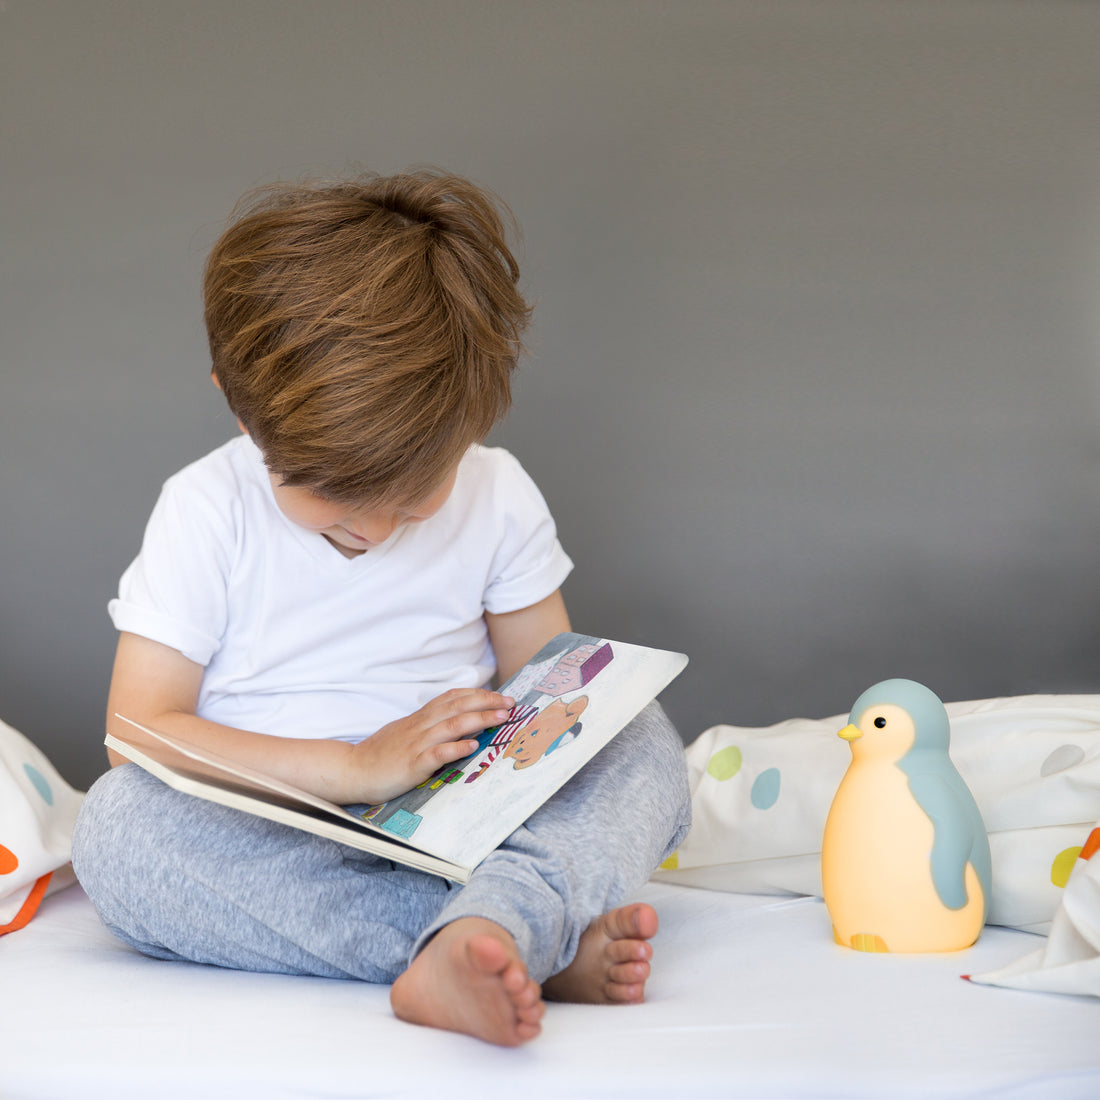 Pam the Penguin – the perks of having a penguin in your nursery